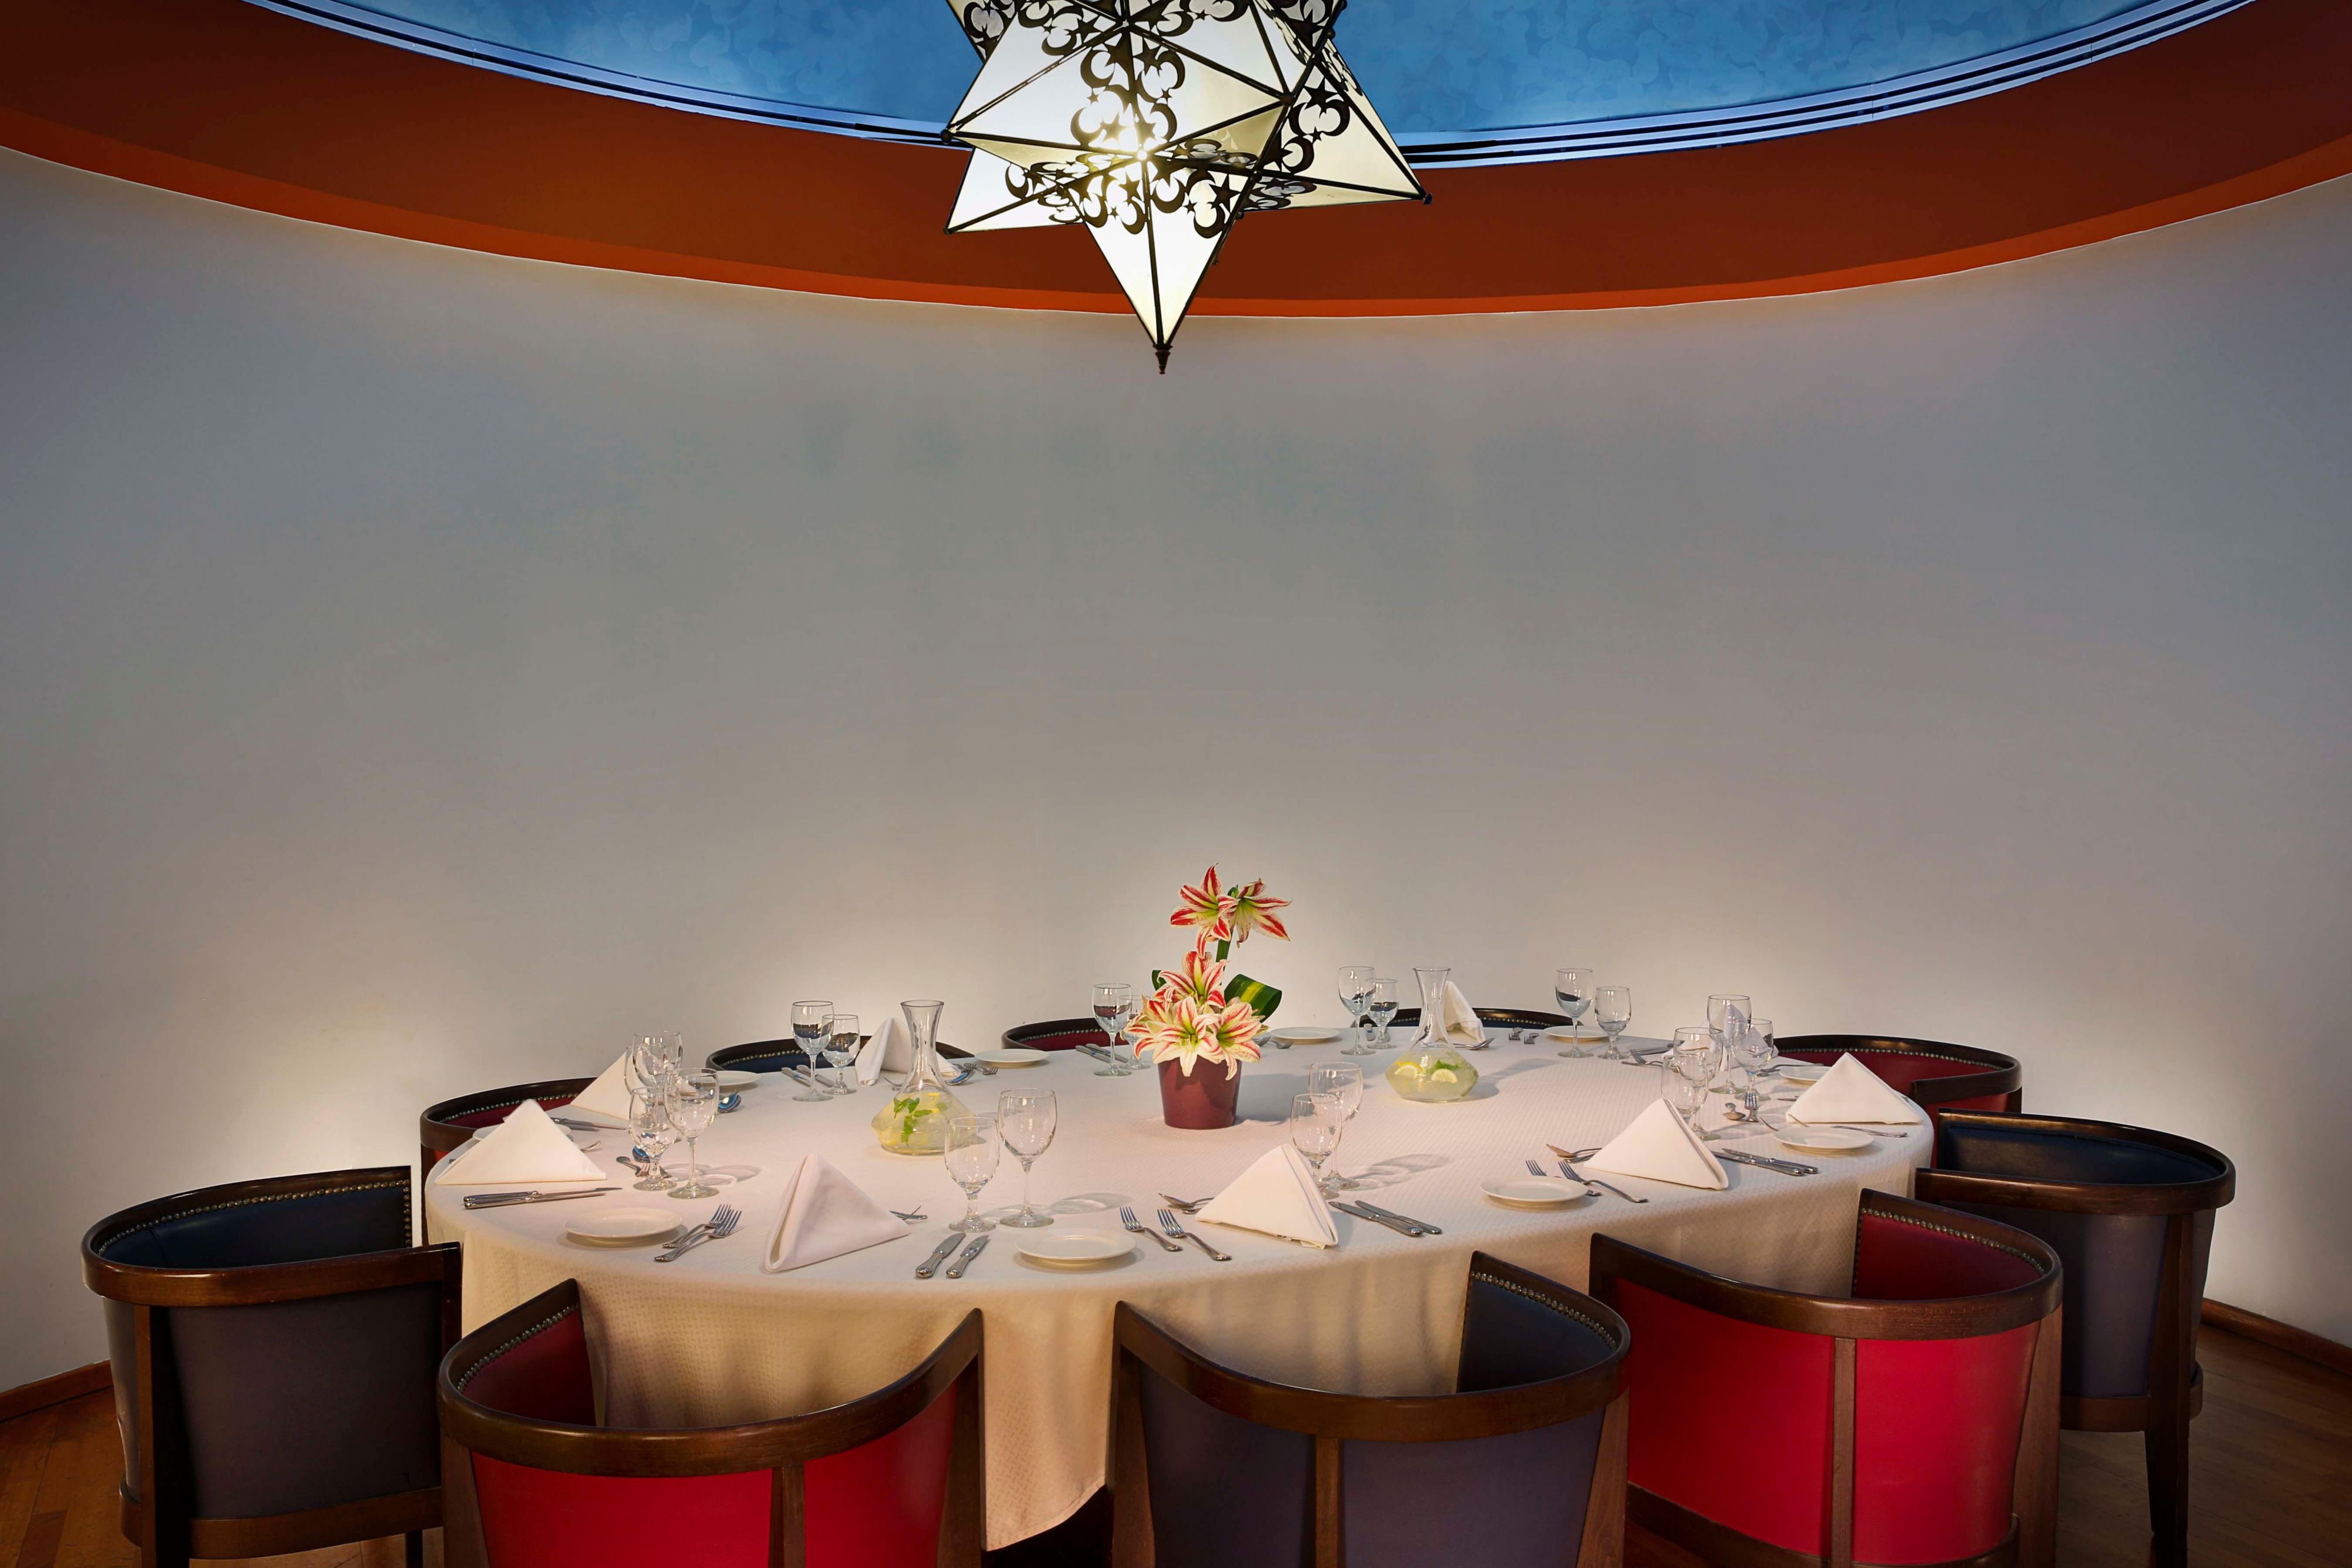 A private dining experience for special occasions